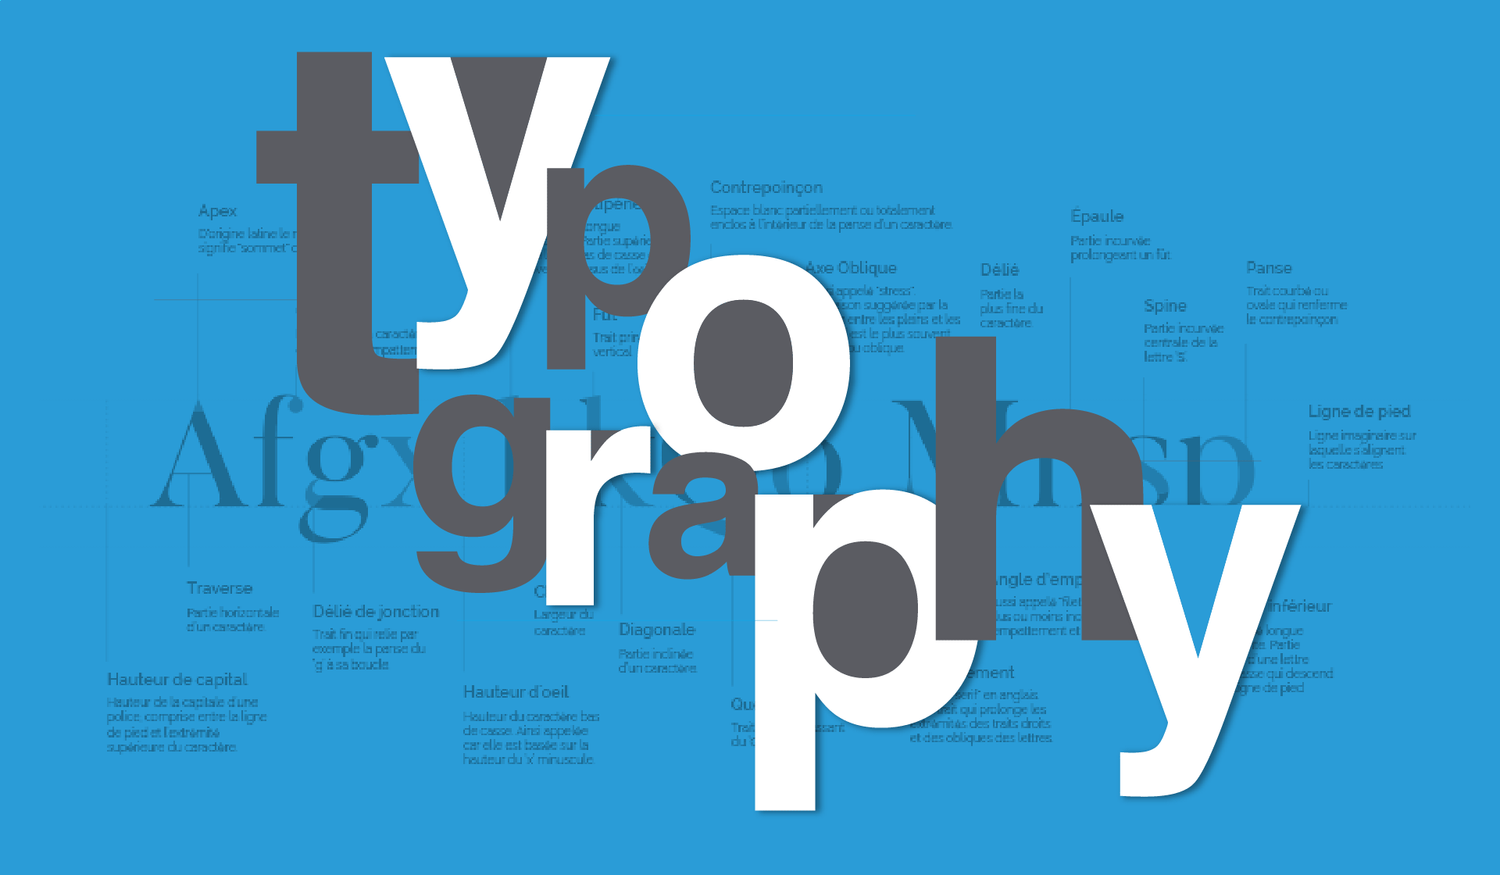 Using Typography as a Graphic Element in Designs